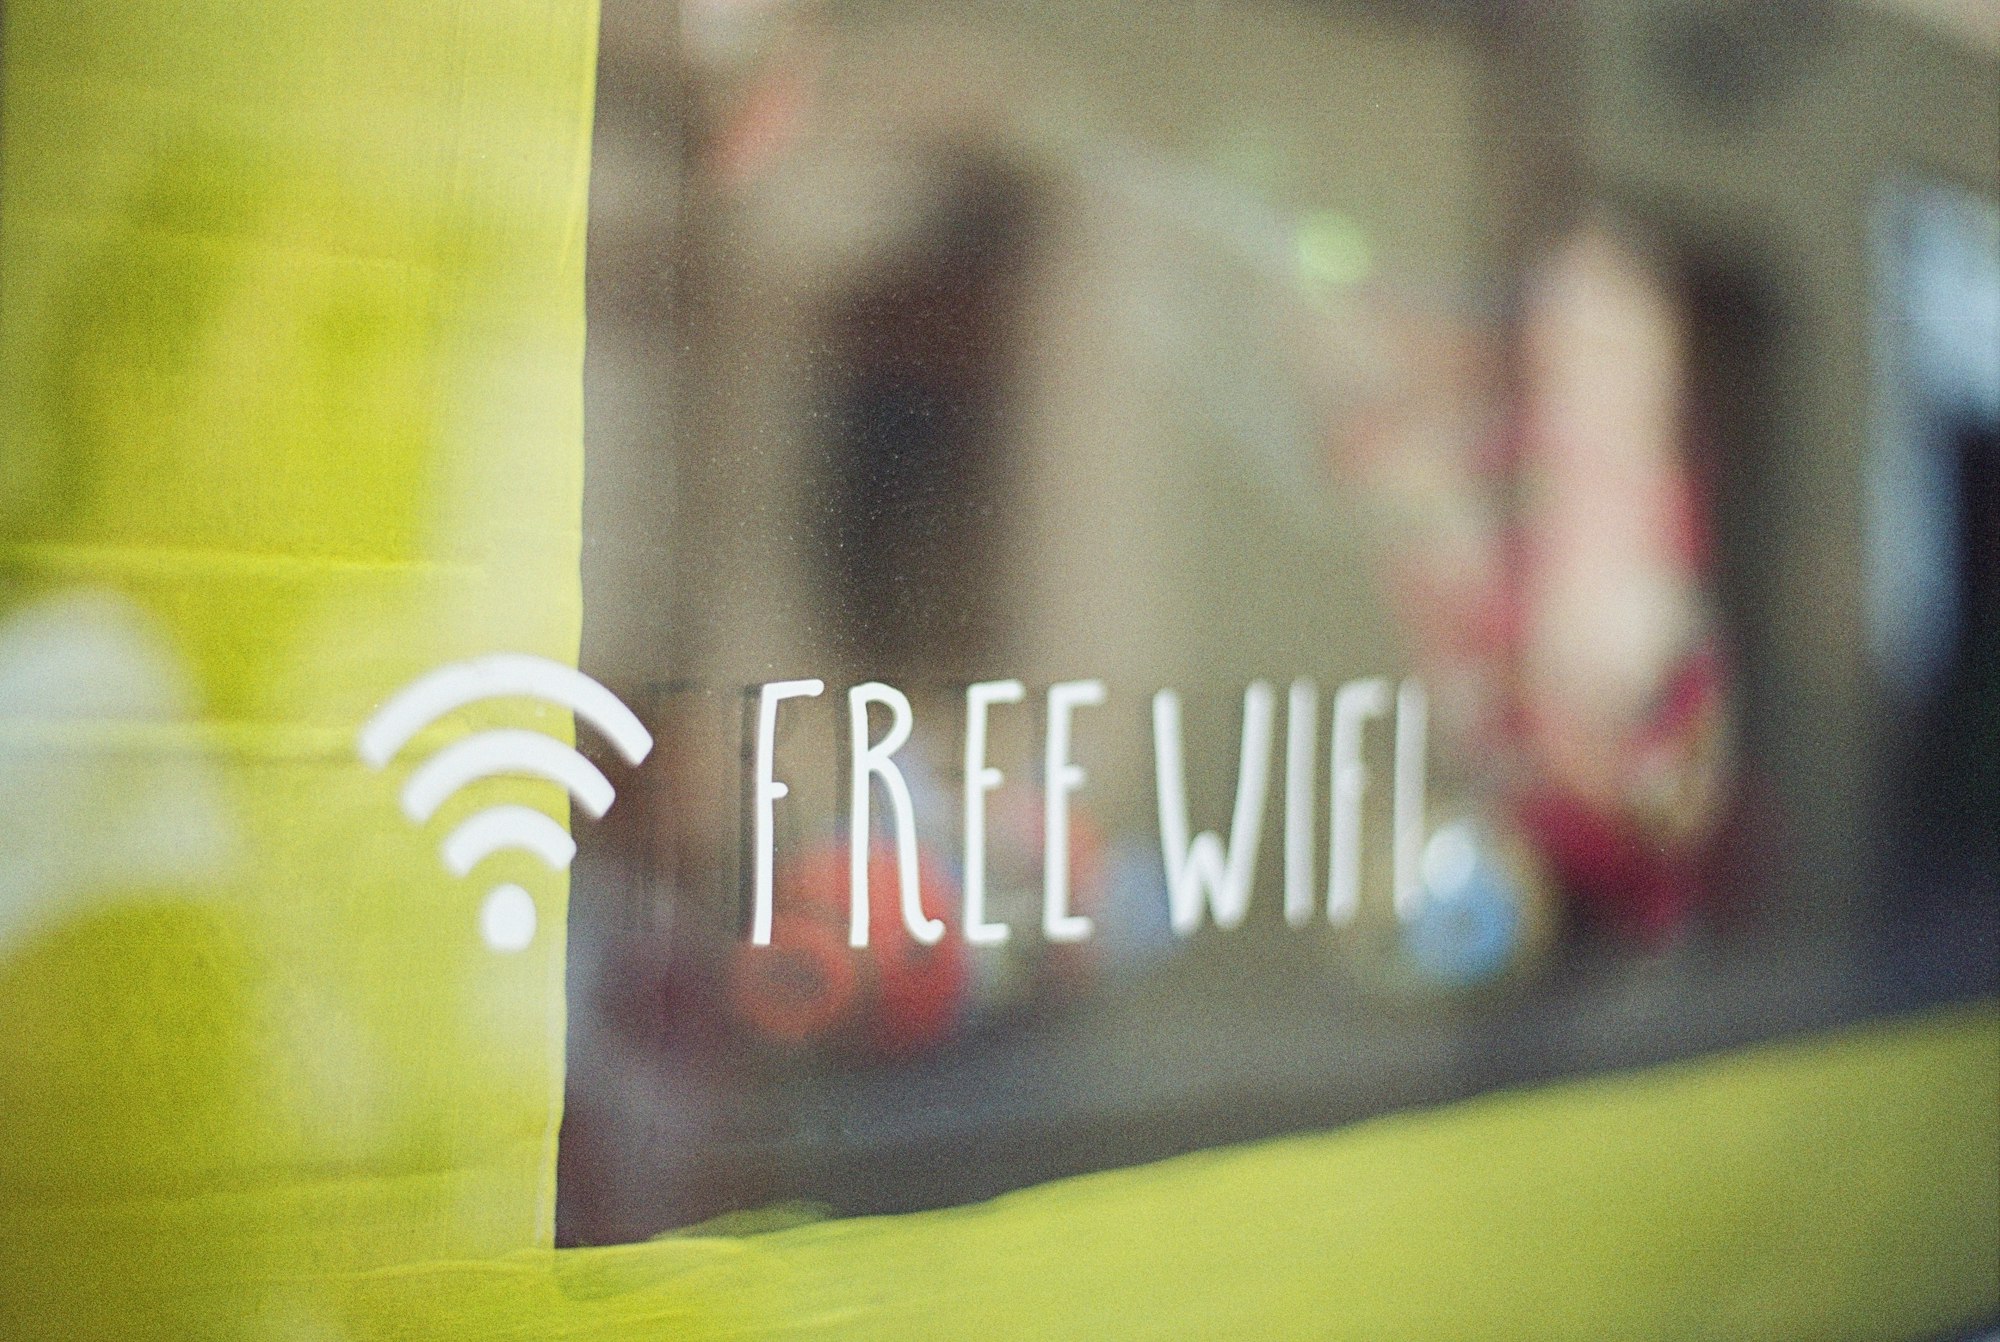 FREE WIFI – let's connect. Made with Leica R7 (1994) and Summicron-R 2.0 35mm (1978). Hi-Res analog scan by: www.totallyinfocus.com – Kodak SO-553 100 (expired 2003)